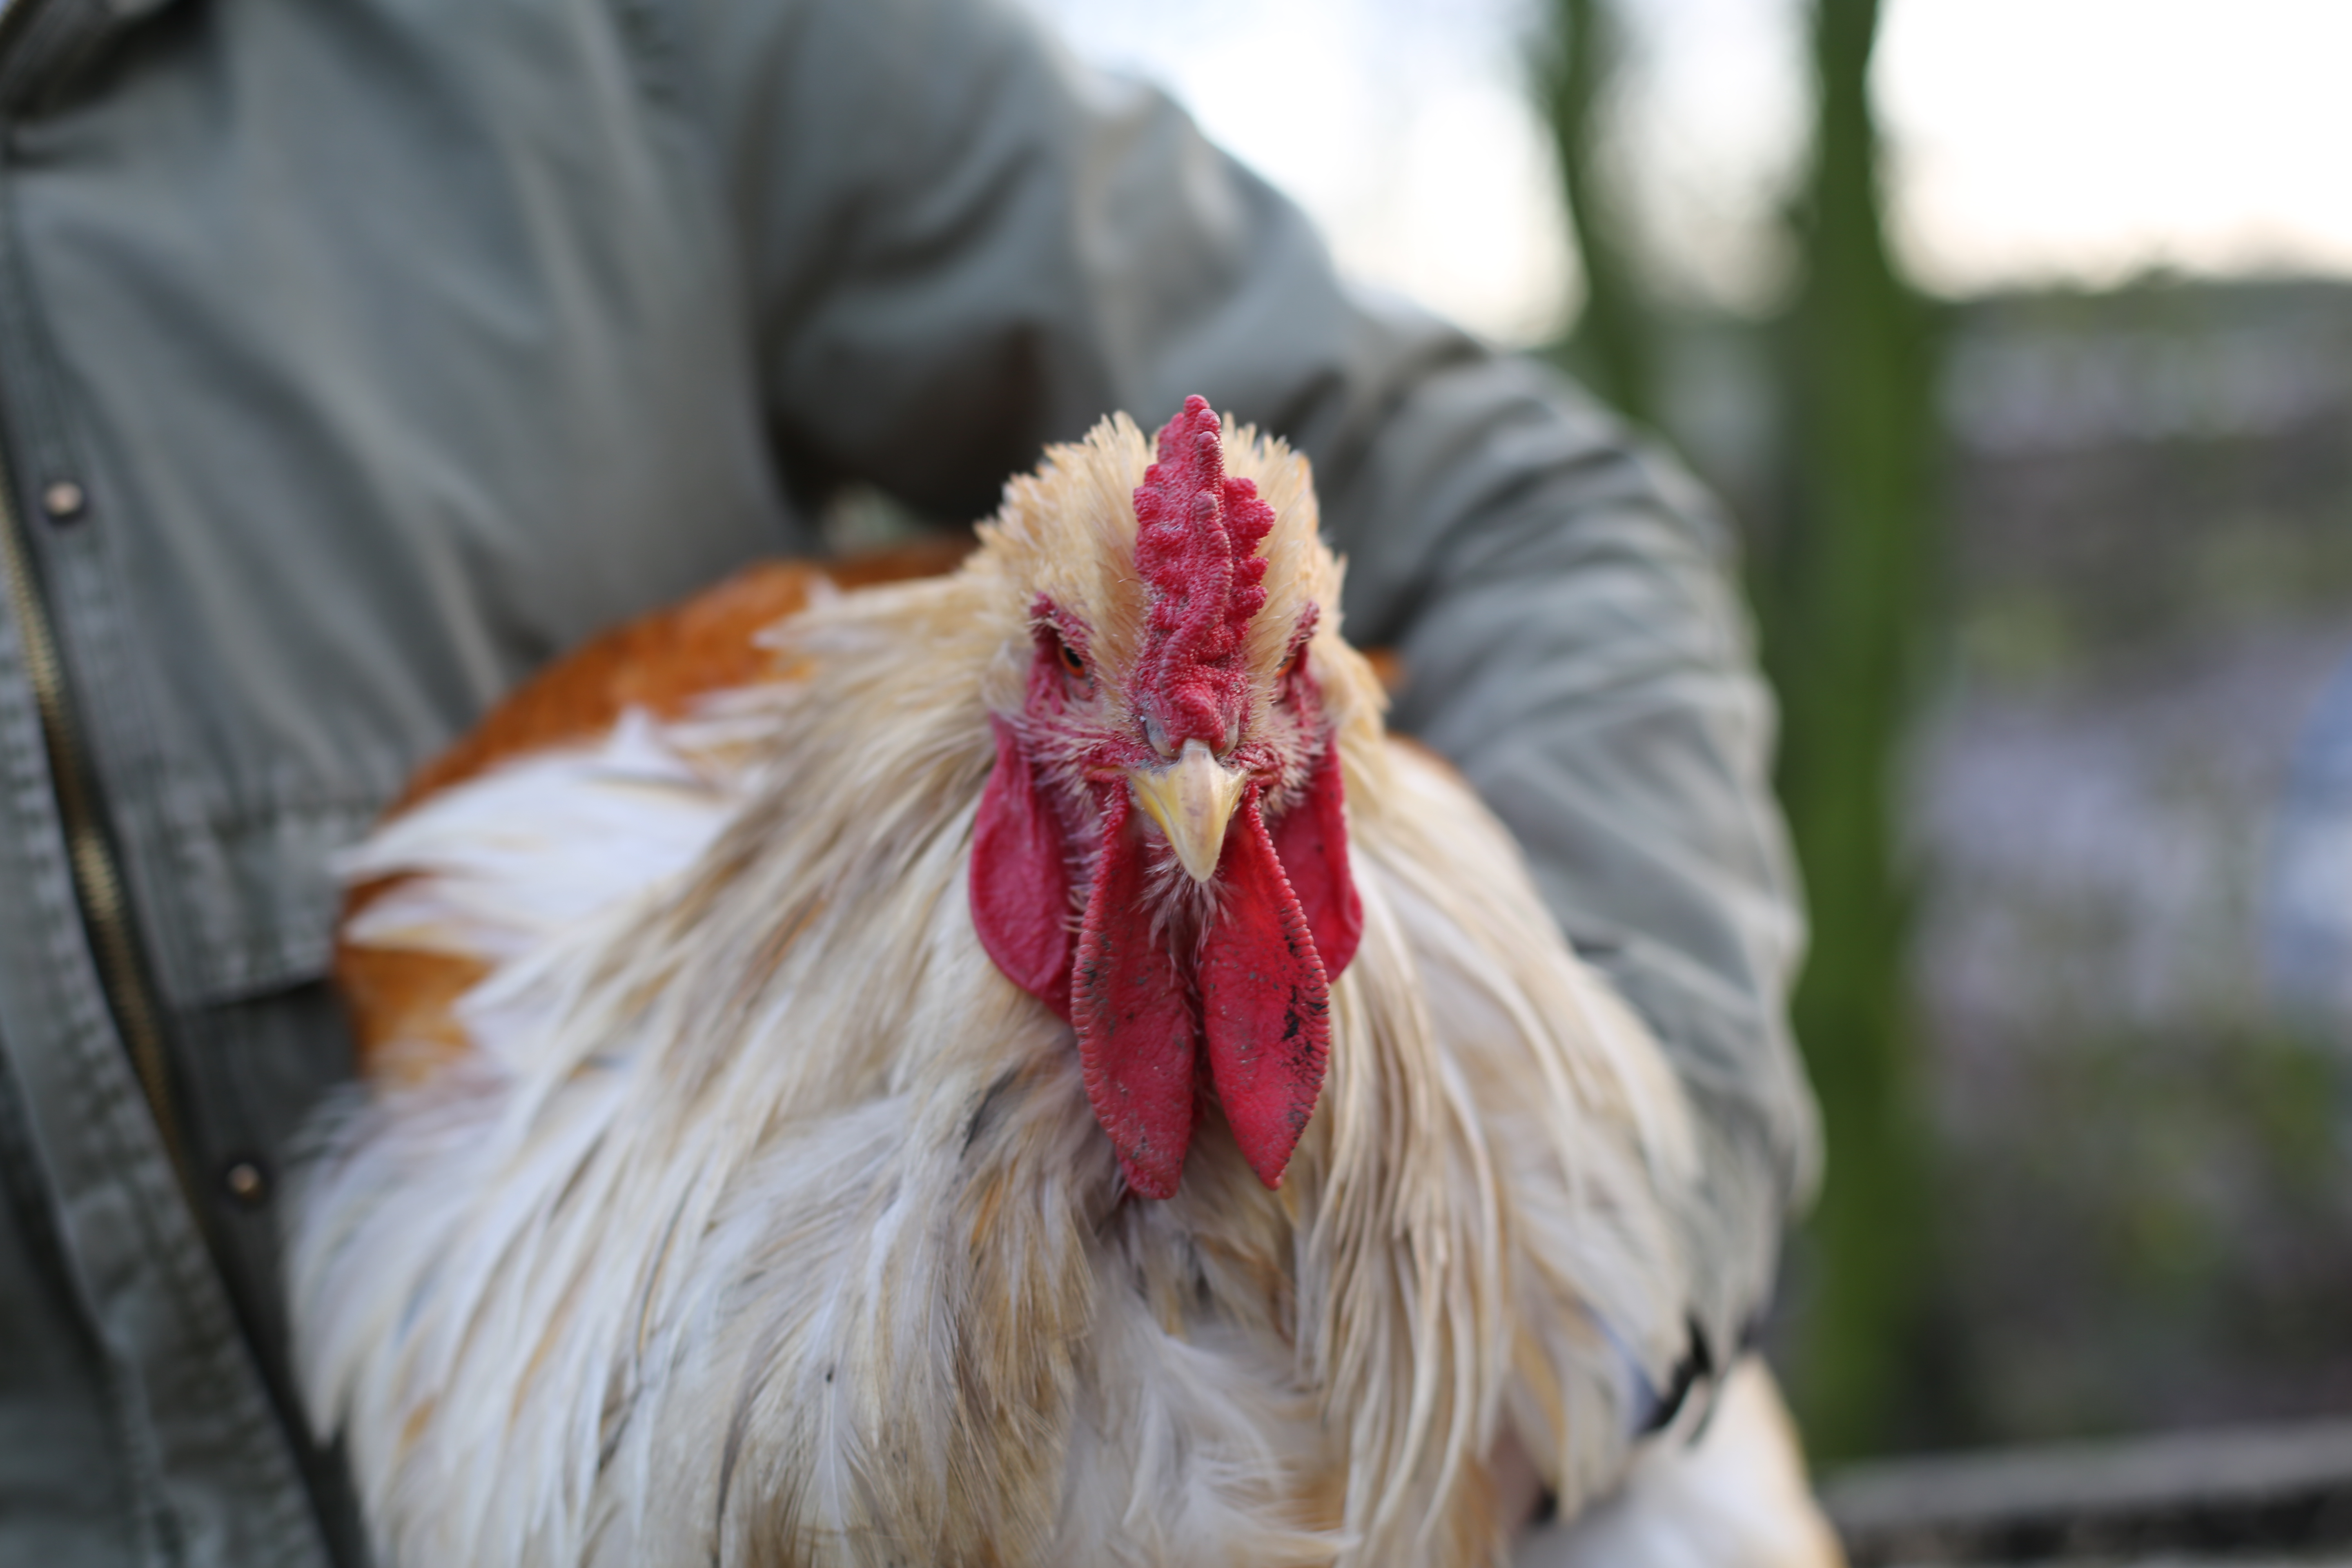 Brahma For Sale Chickens Breed Information Omlet